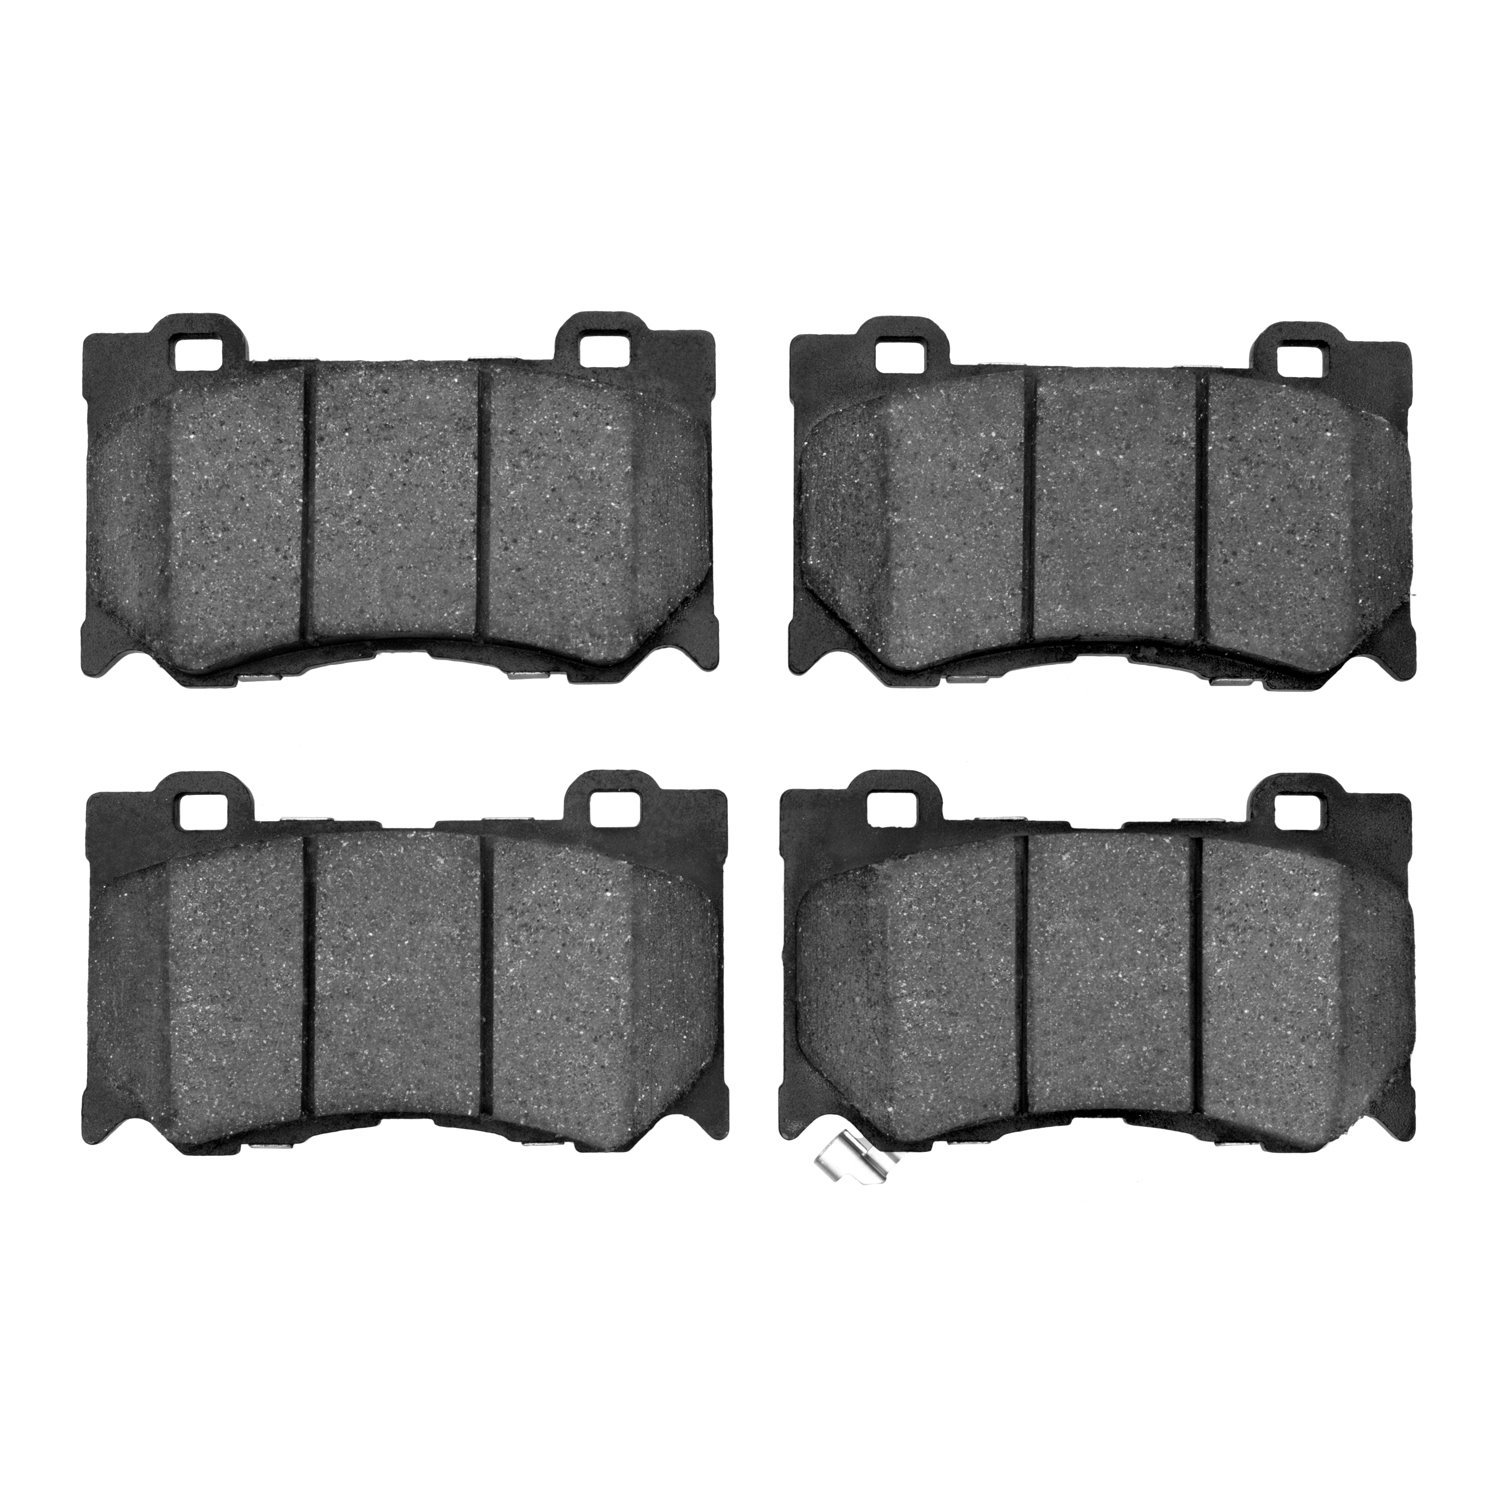 Performance Sport Brake Pads, Fits Select Infiniti/Nissan, Position: Front